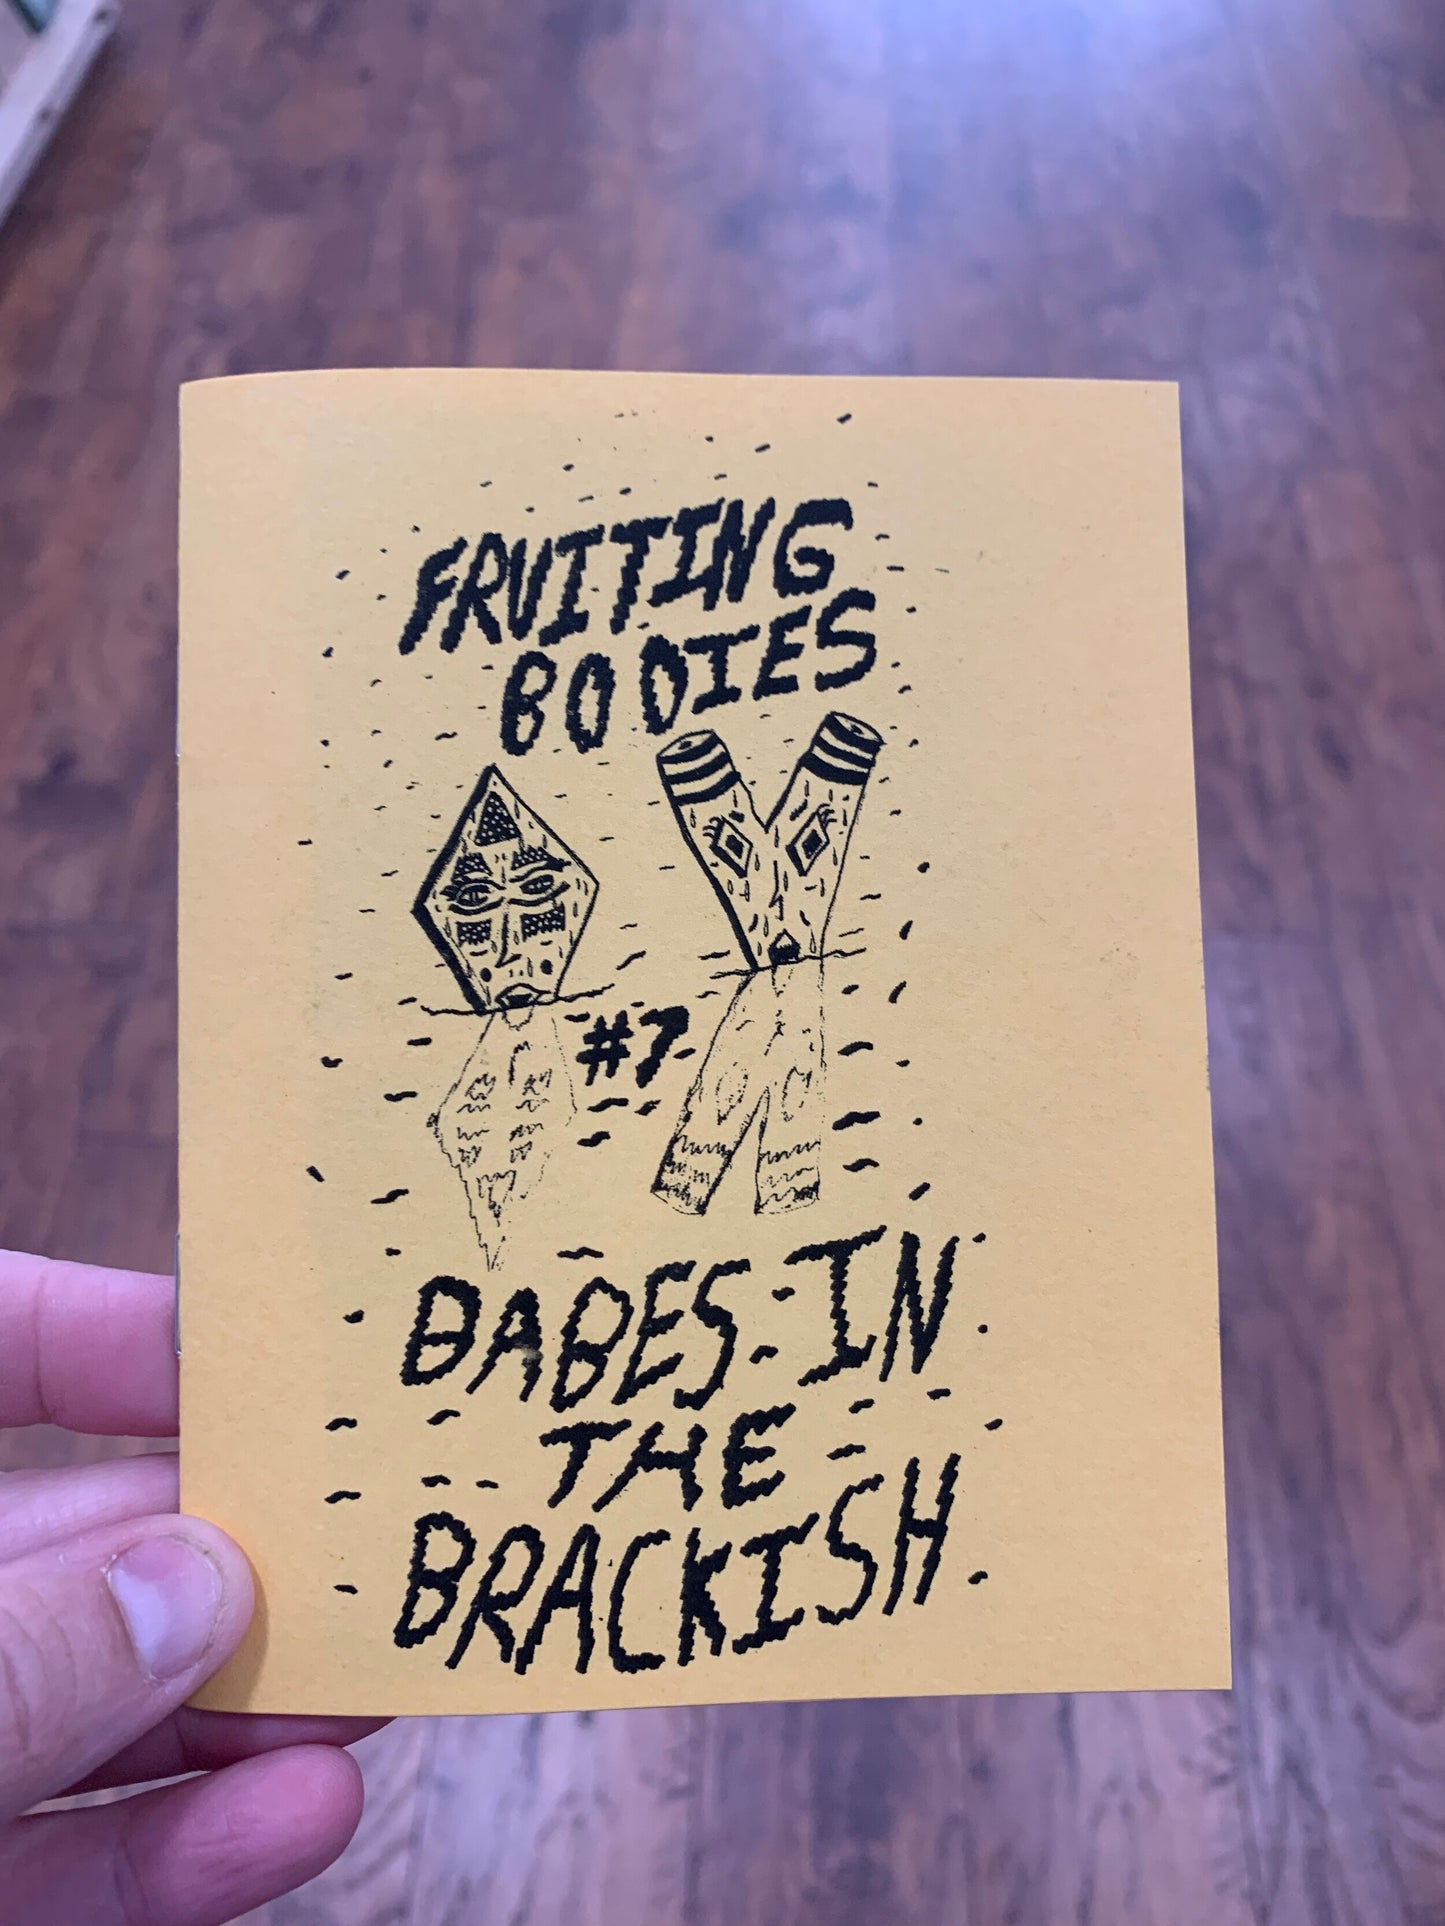 Fruiting Bodies #7: Babies in the Brackish